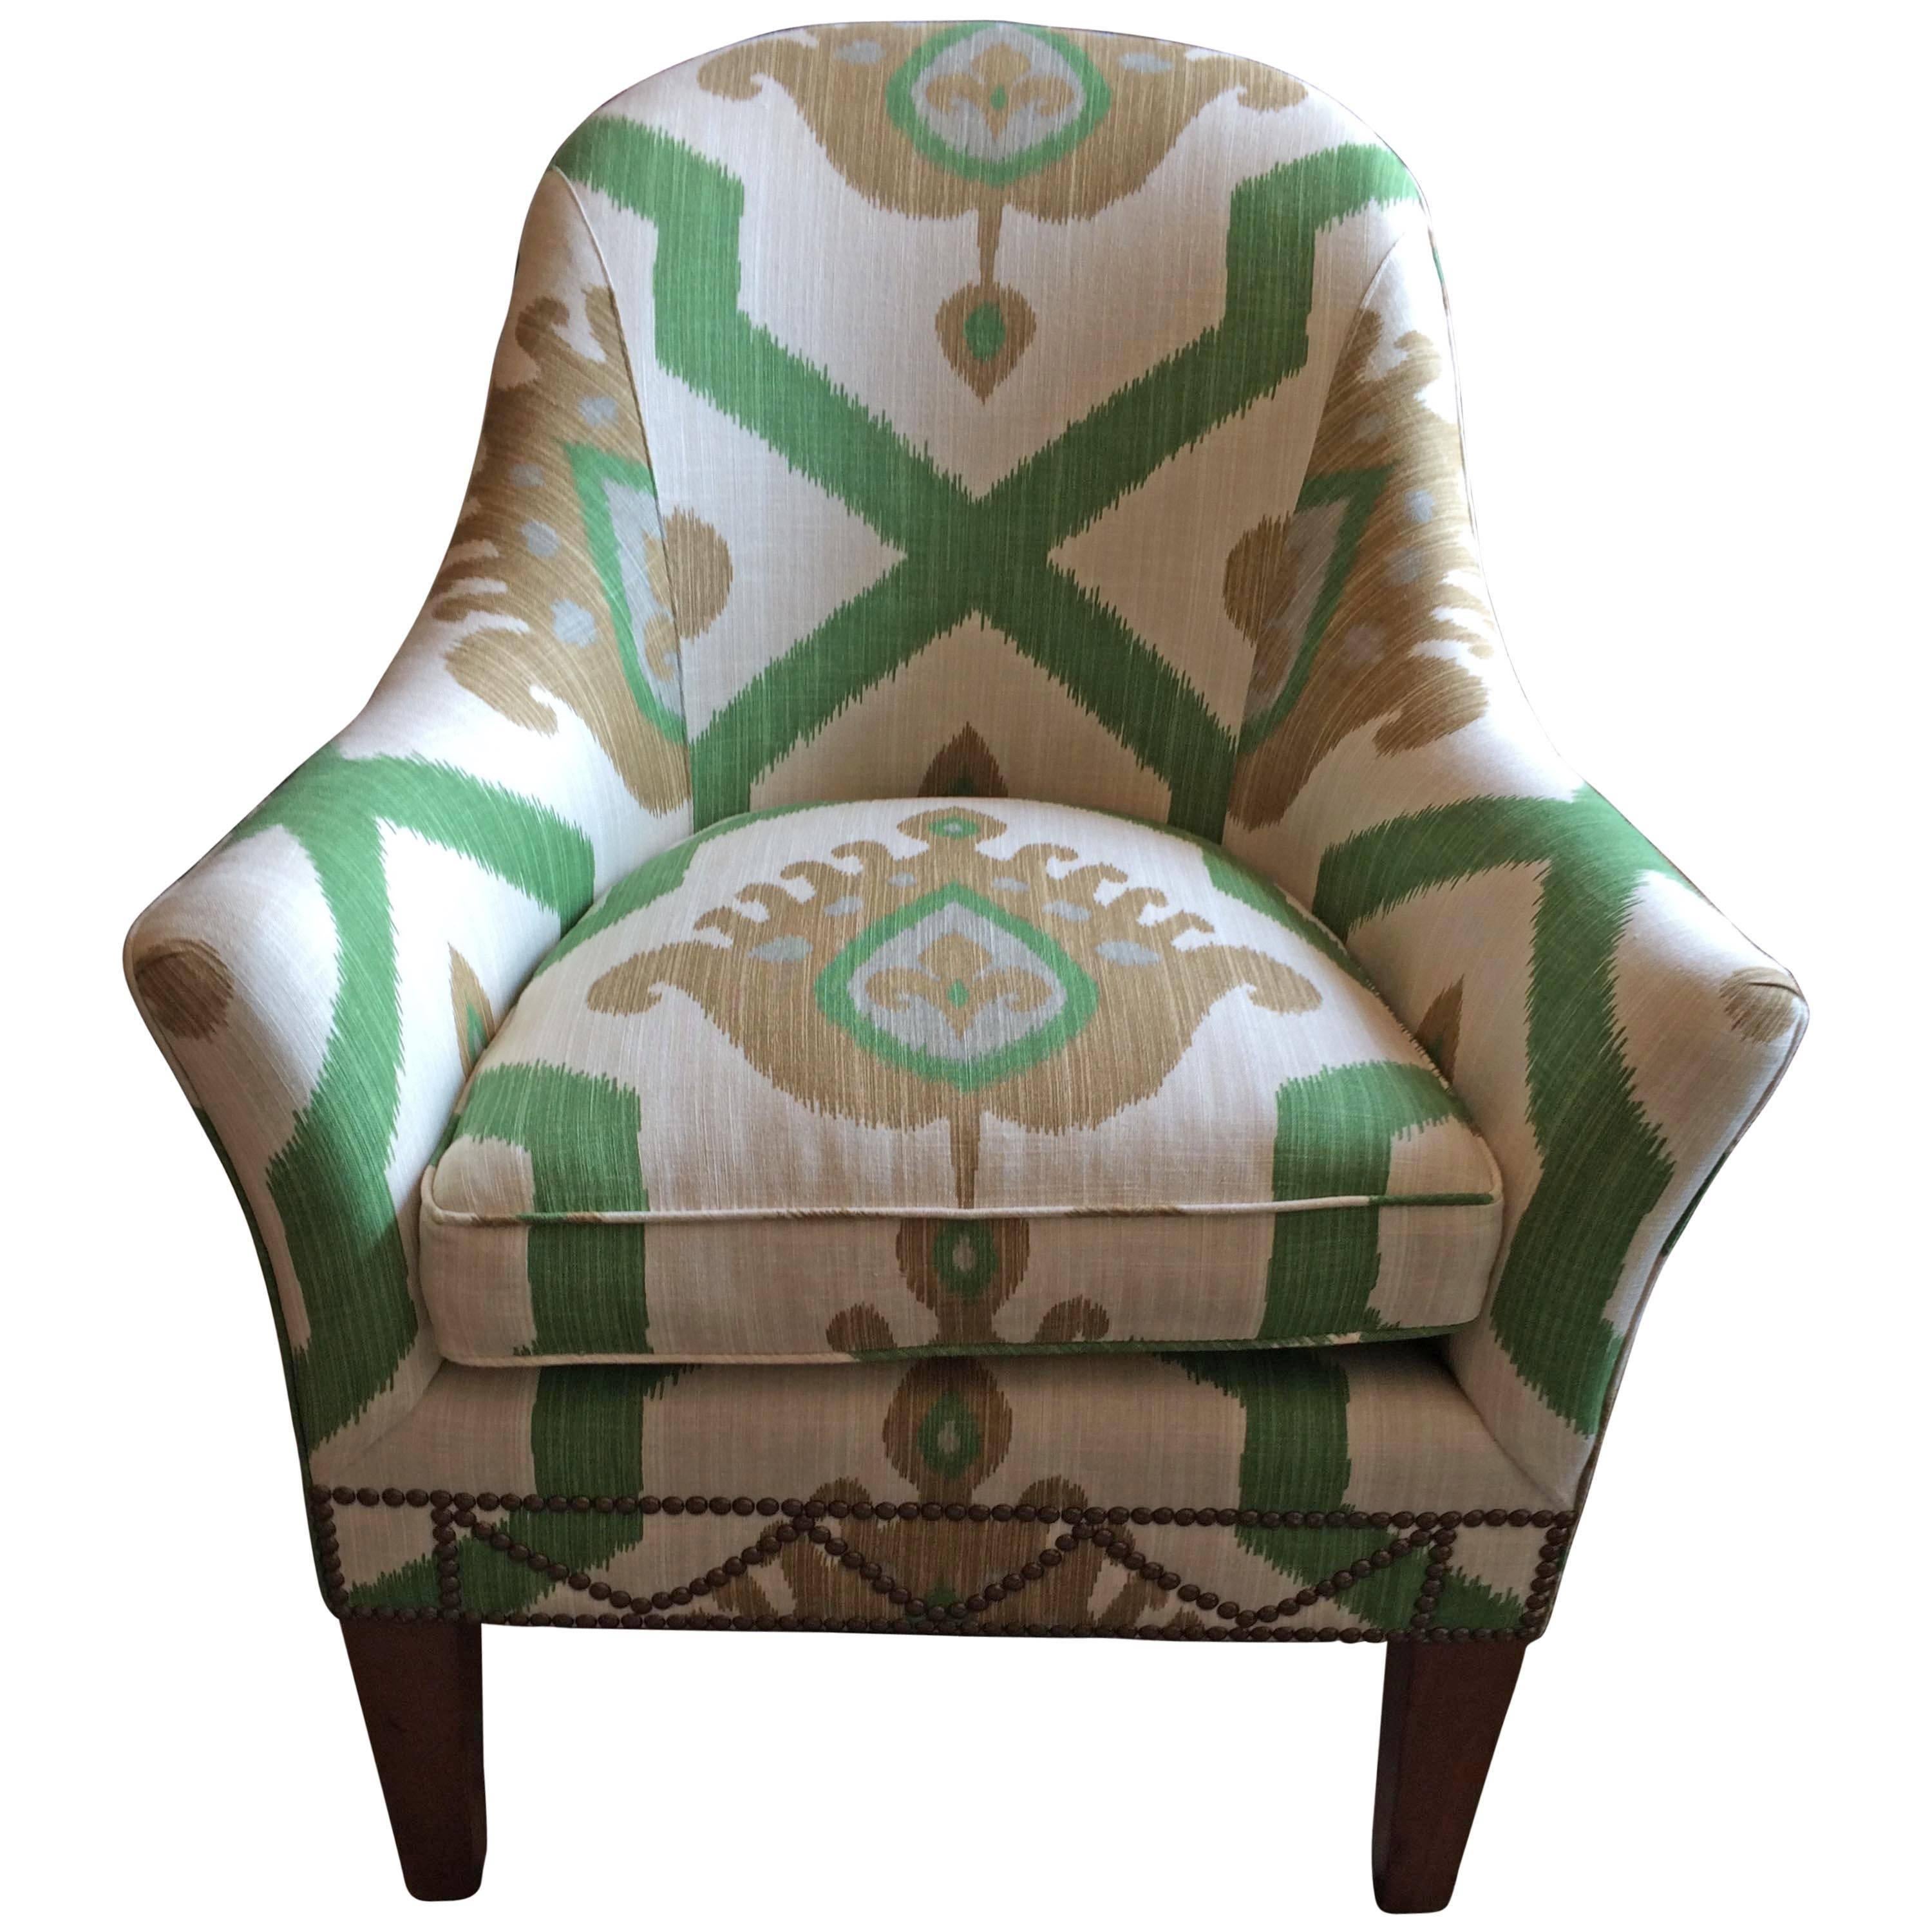 Comfy vintage club chair newly updated in Thibaut Ikat fabric and schnazzy brass nailheads around the bottom. Mahogany legs.
A darling crescent shaped ottoman is also included.

KJ